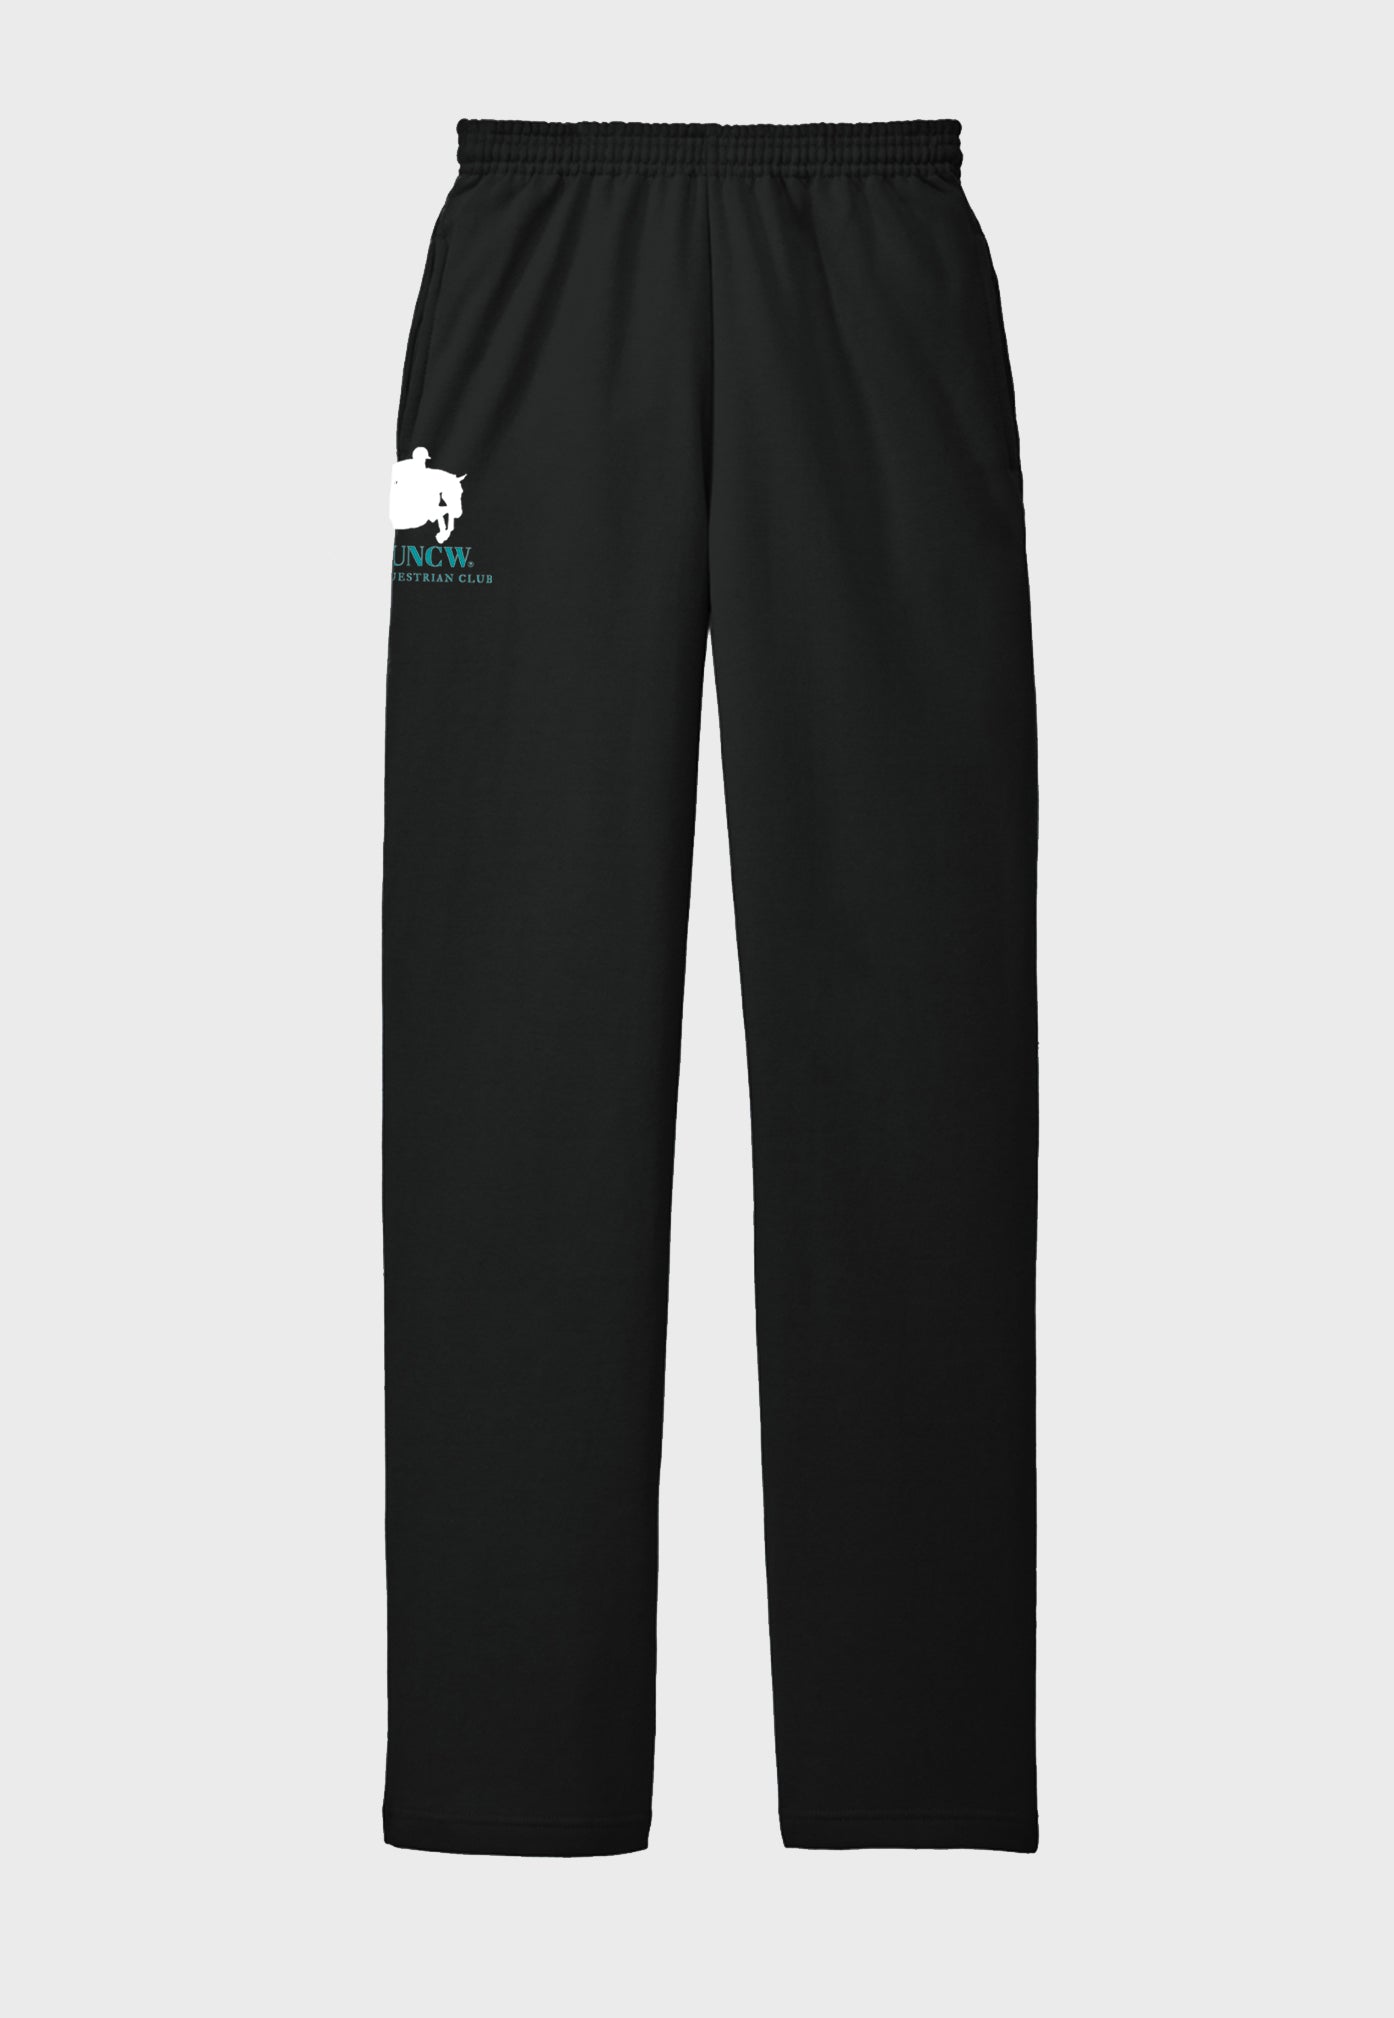 UNCW Equestrian Club Core Fleece Sweatpant with Pockets (Unisex) - Adult + Youth Sizes